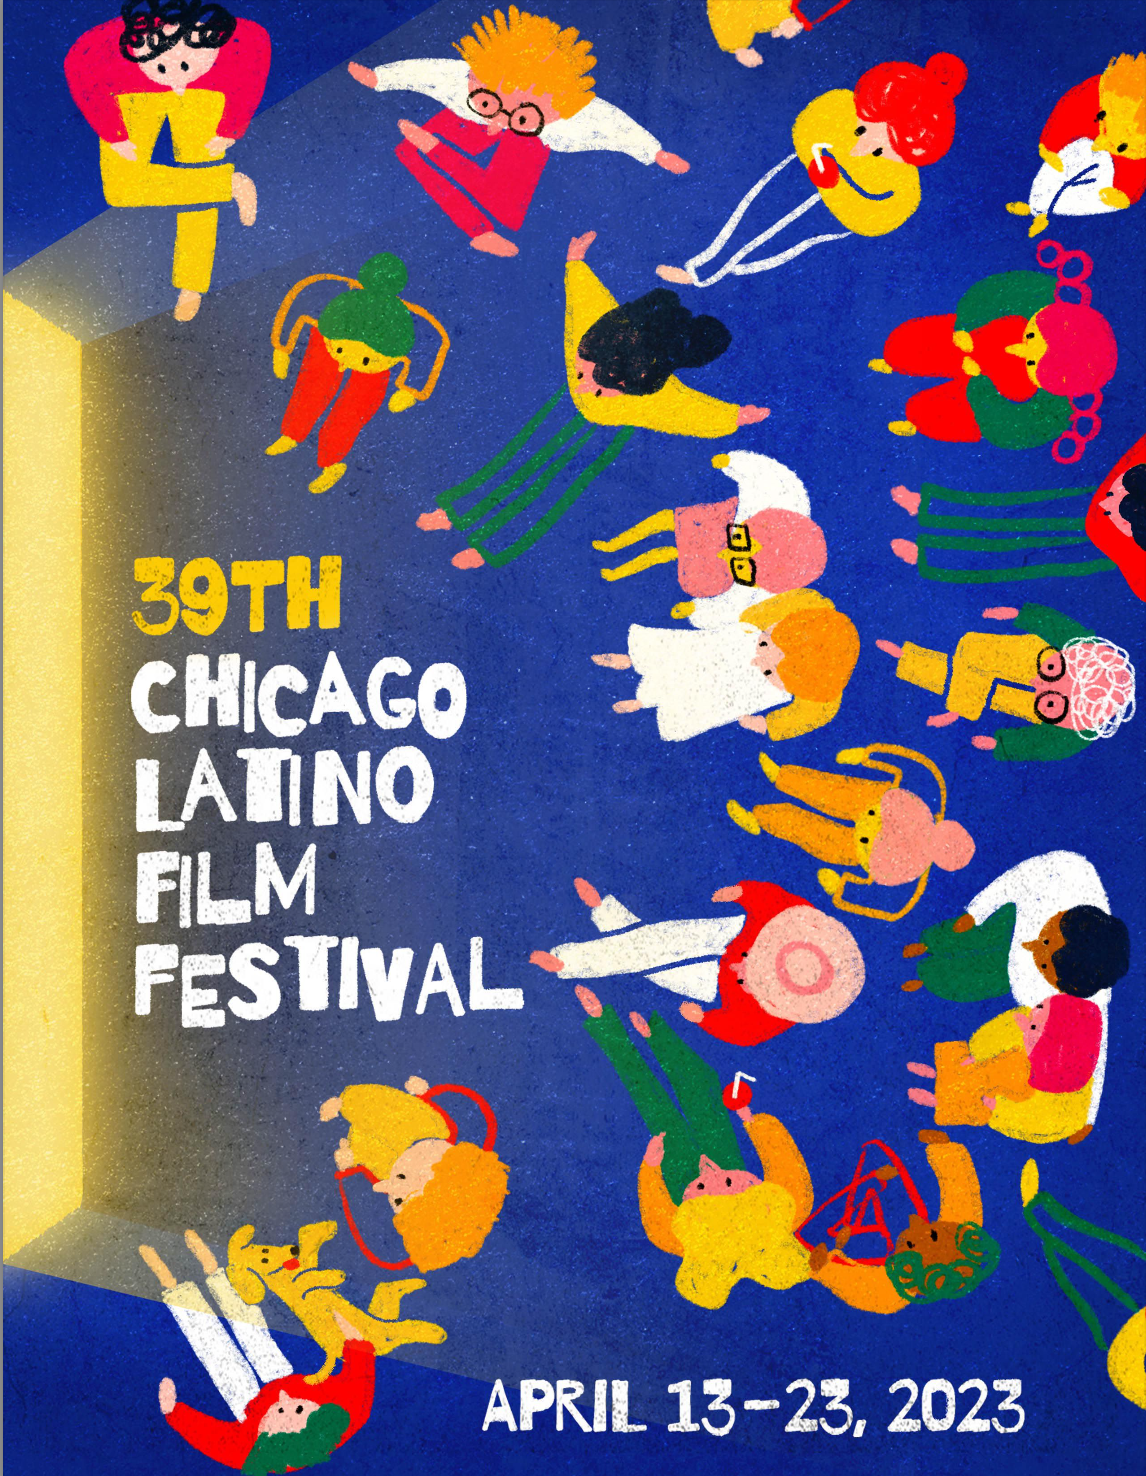 coloruful poster about Chicago Latino film festival